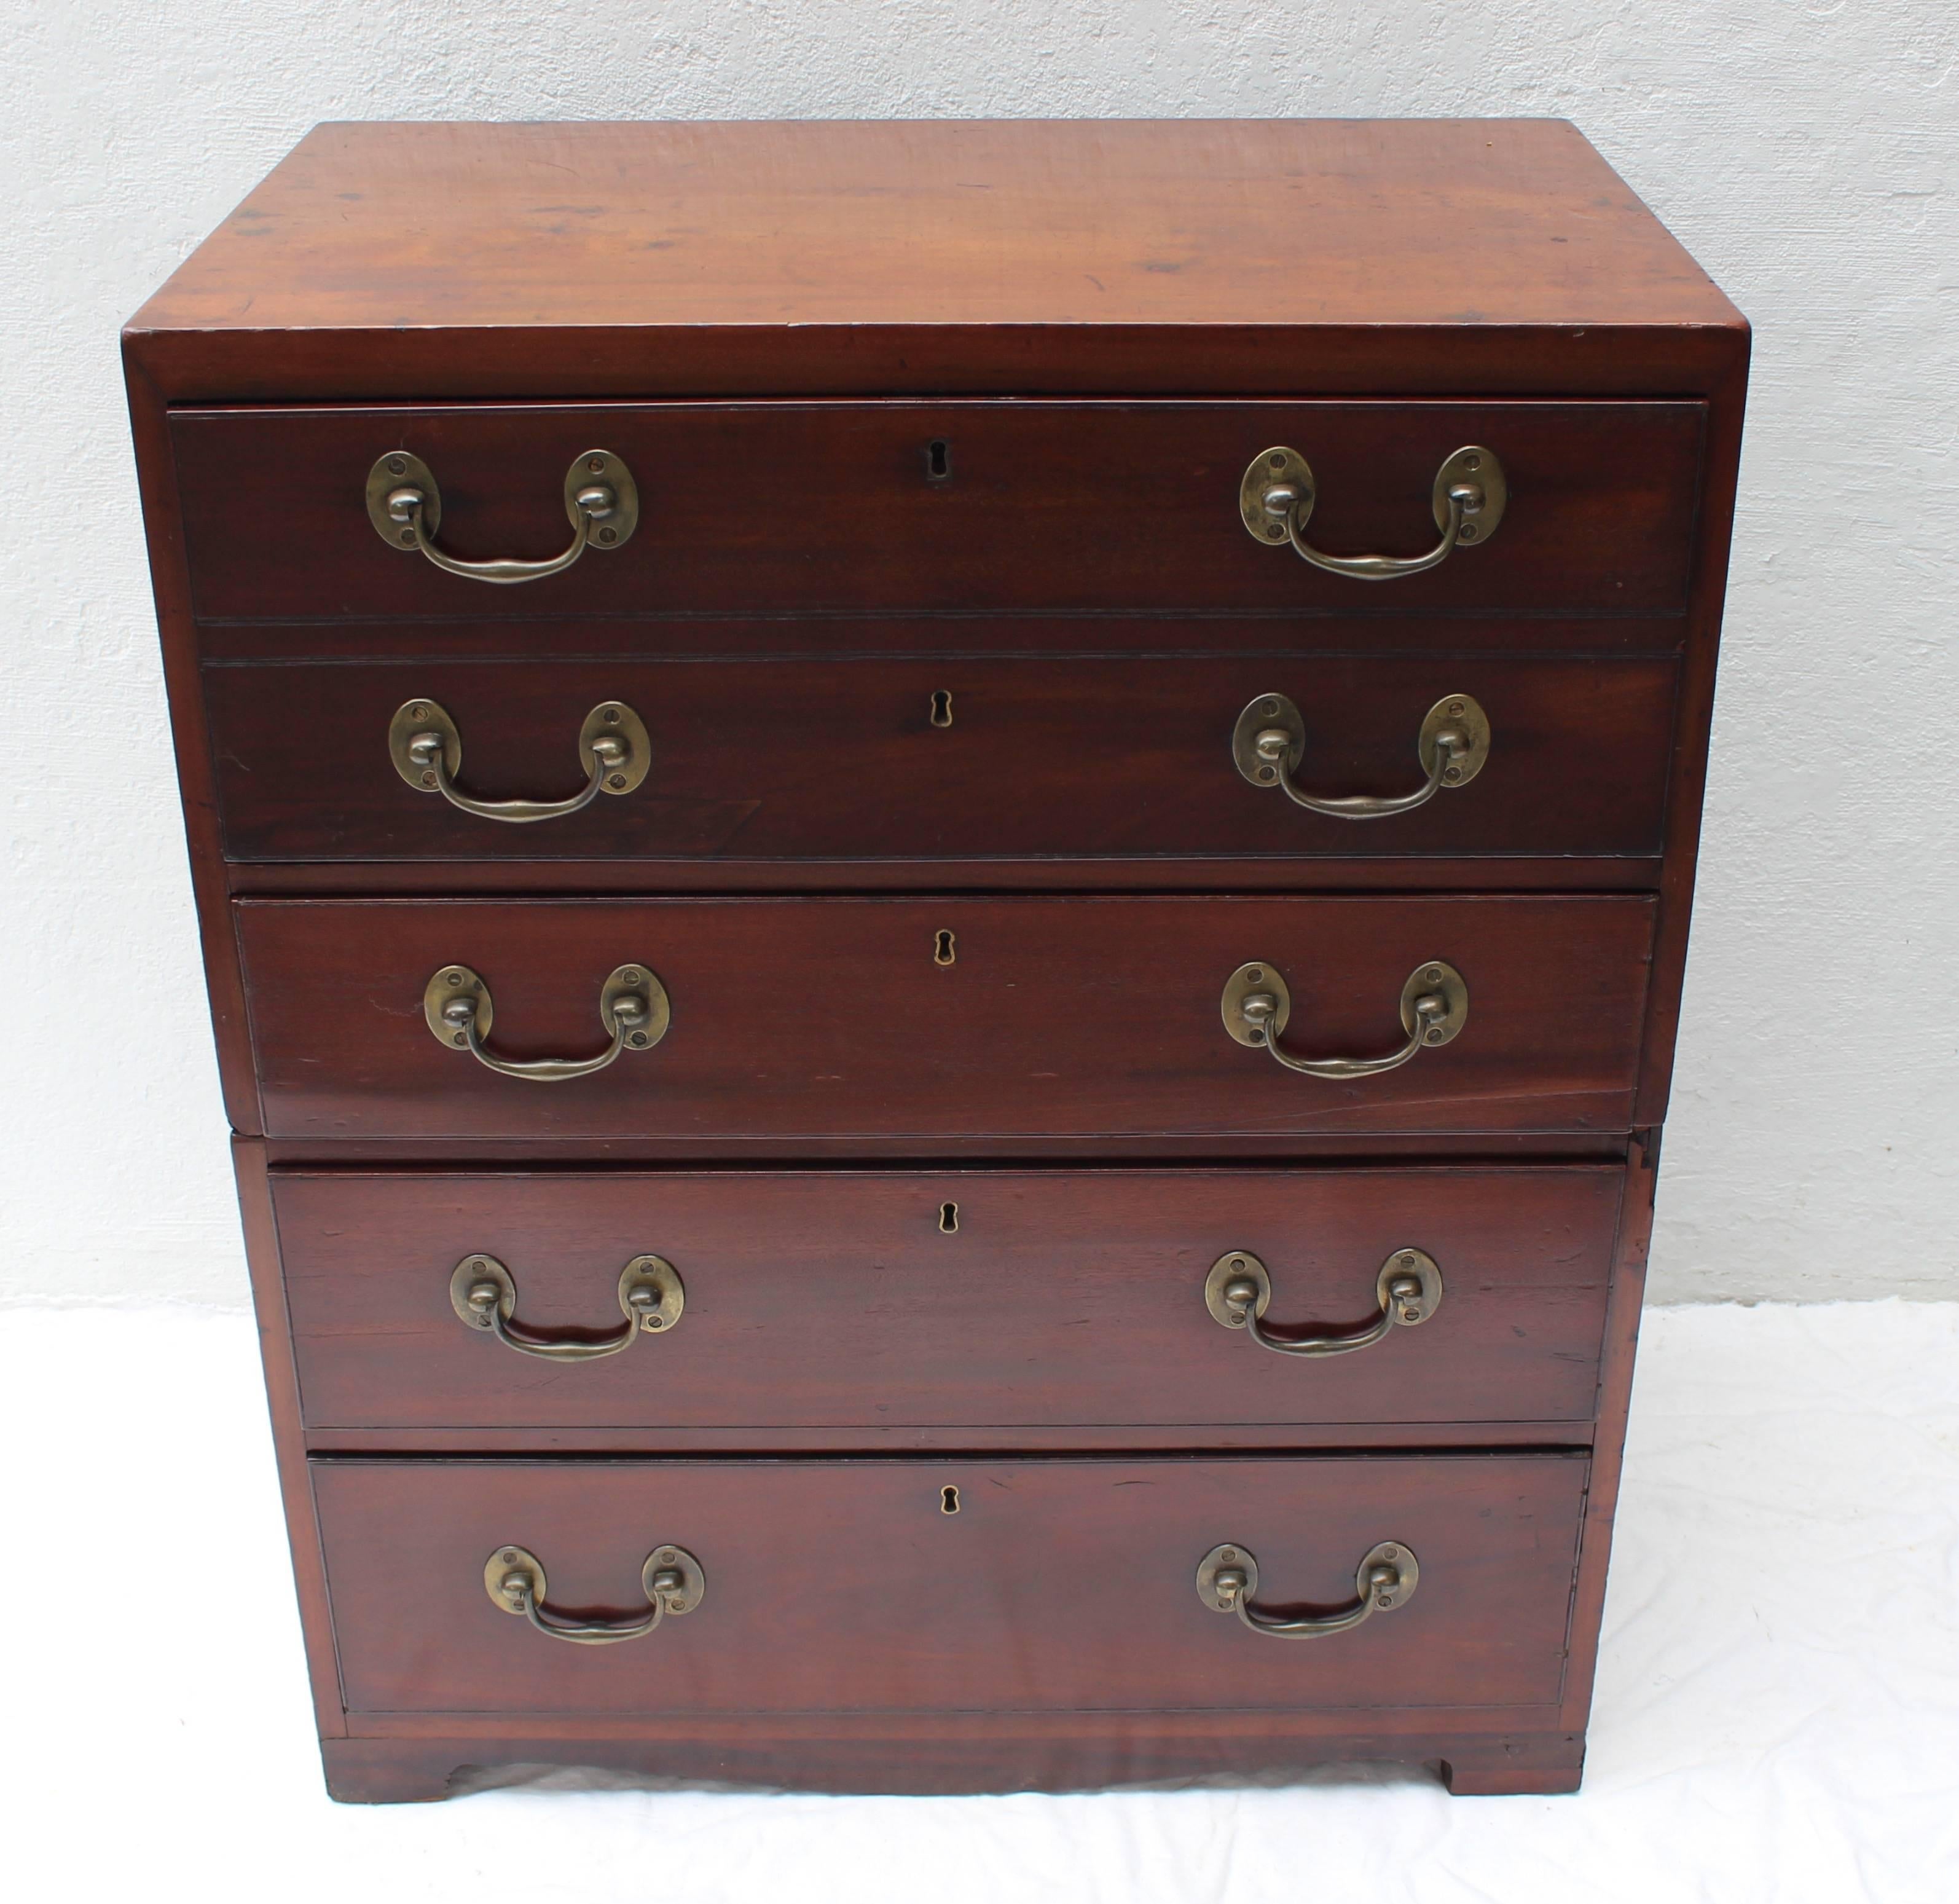 Fabulous 19th century English two-part campaign chest..... the top two drawers hold a pull-out desk...